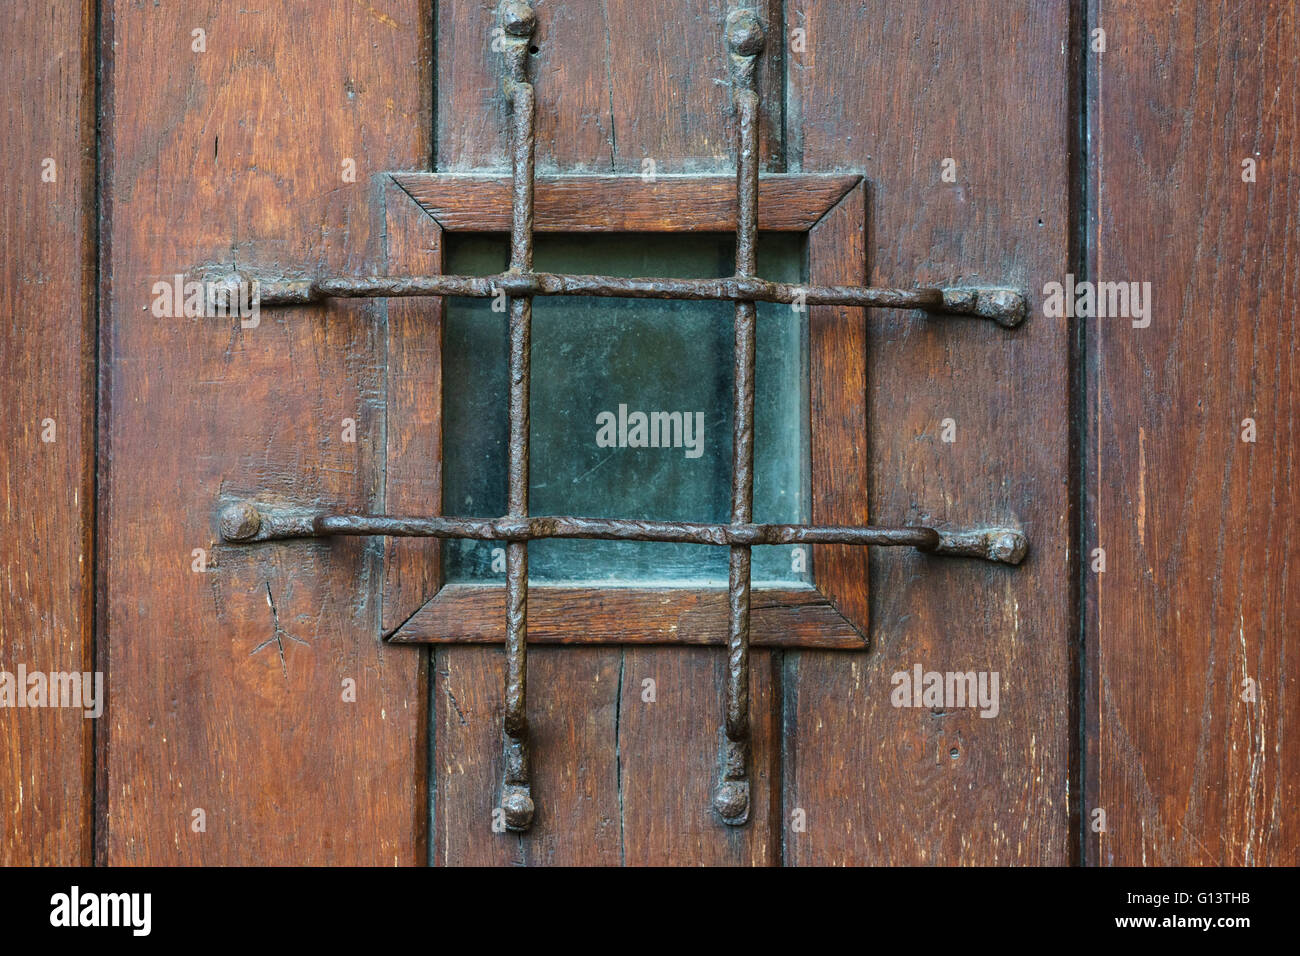 Small square window with grate in old style wooden door, confinement concept Stock Photo